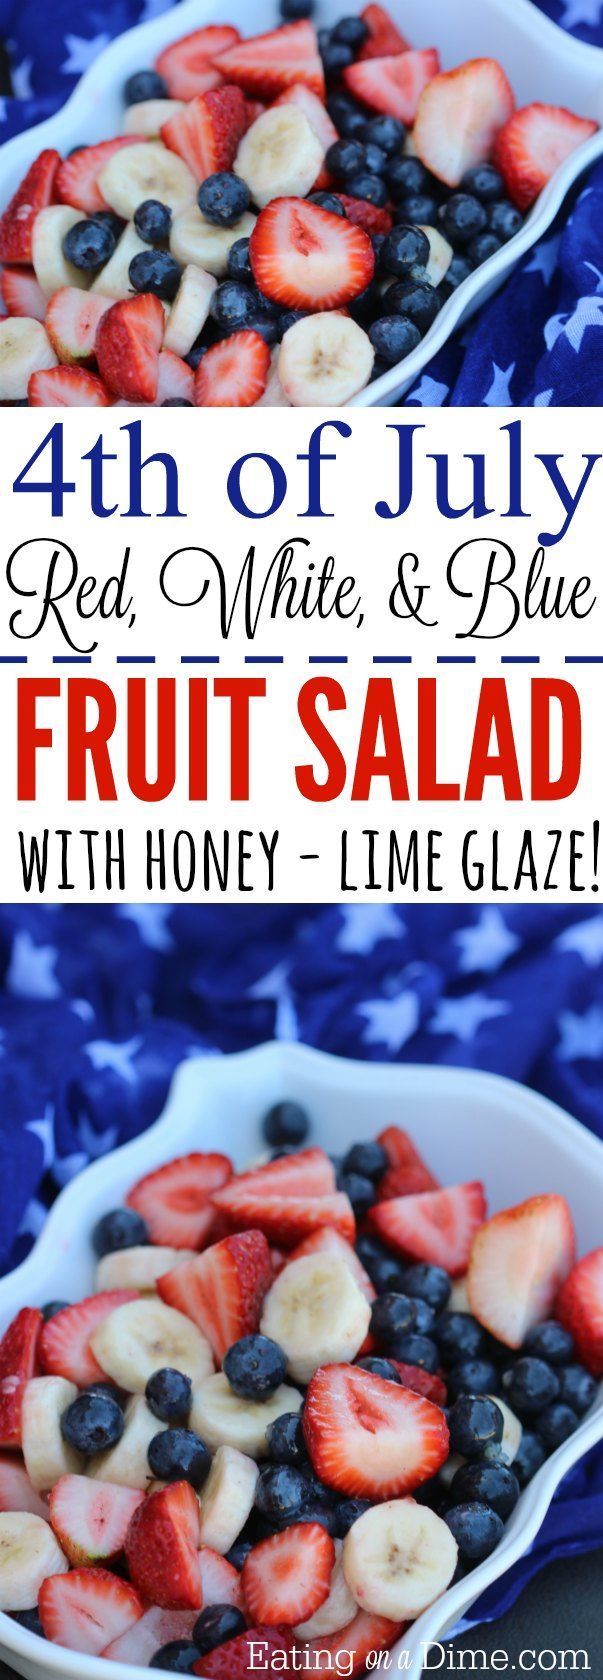 Red, White, and Blue Fruit Salad - Red, White, and Blue Fruit Salad -   July 4th food Ideas